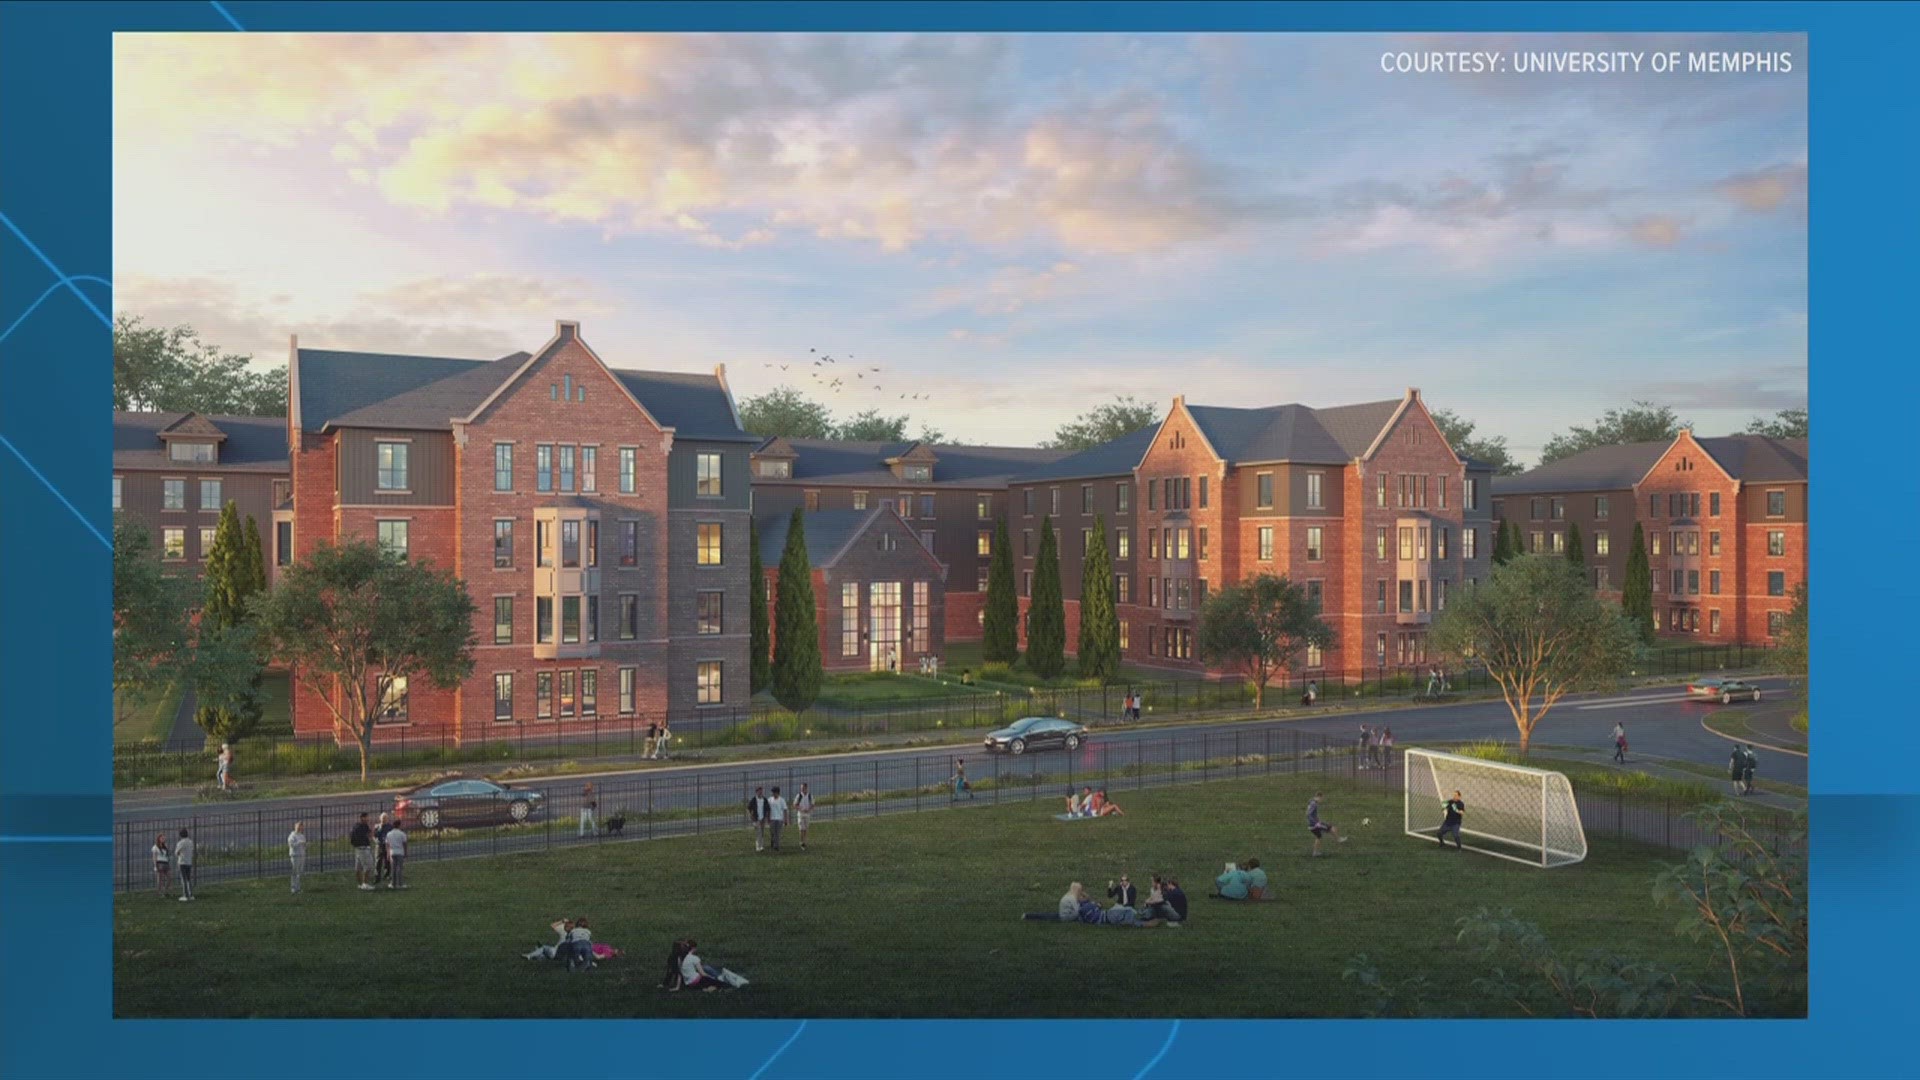 The U of M said the 540-bed apartment-style student housing development is planned for fall of 2026.